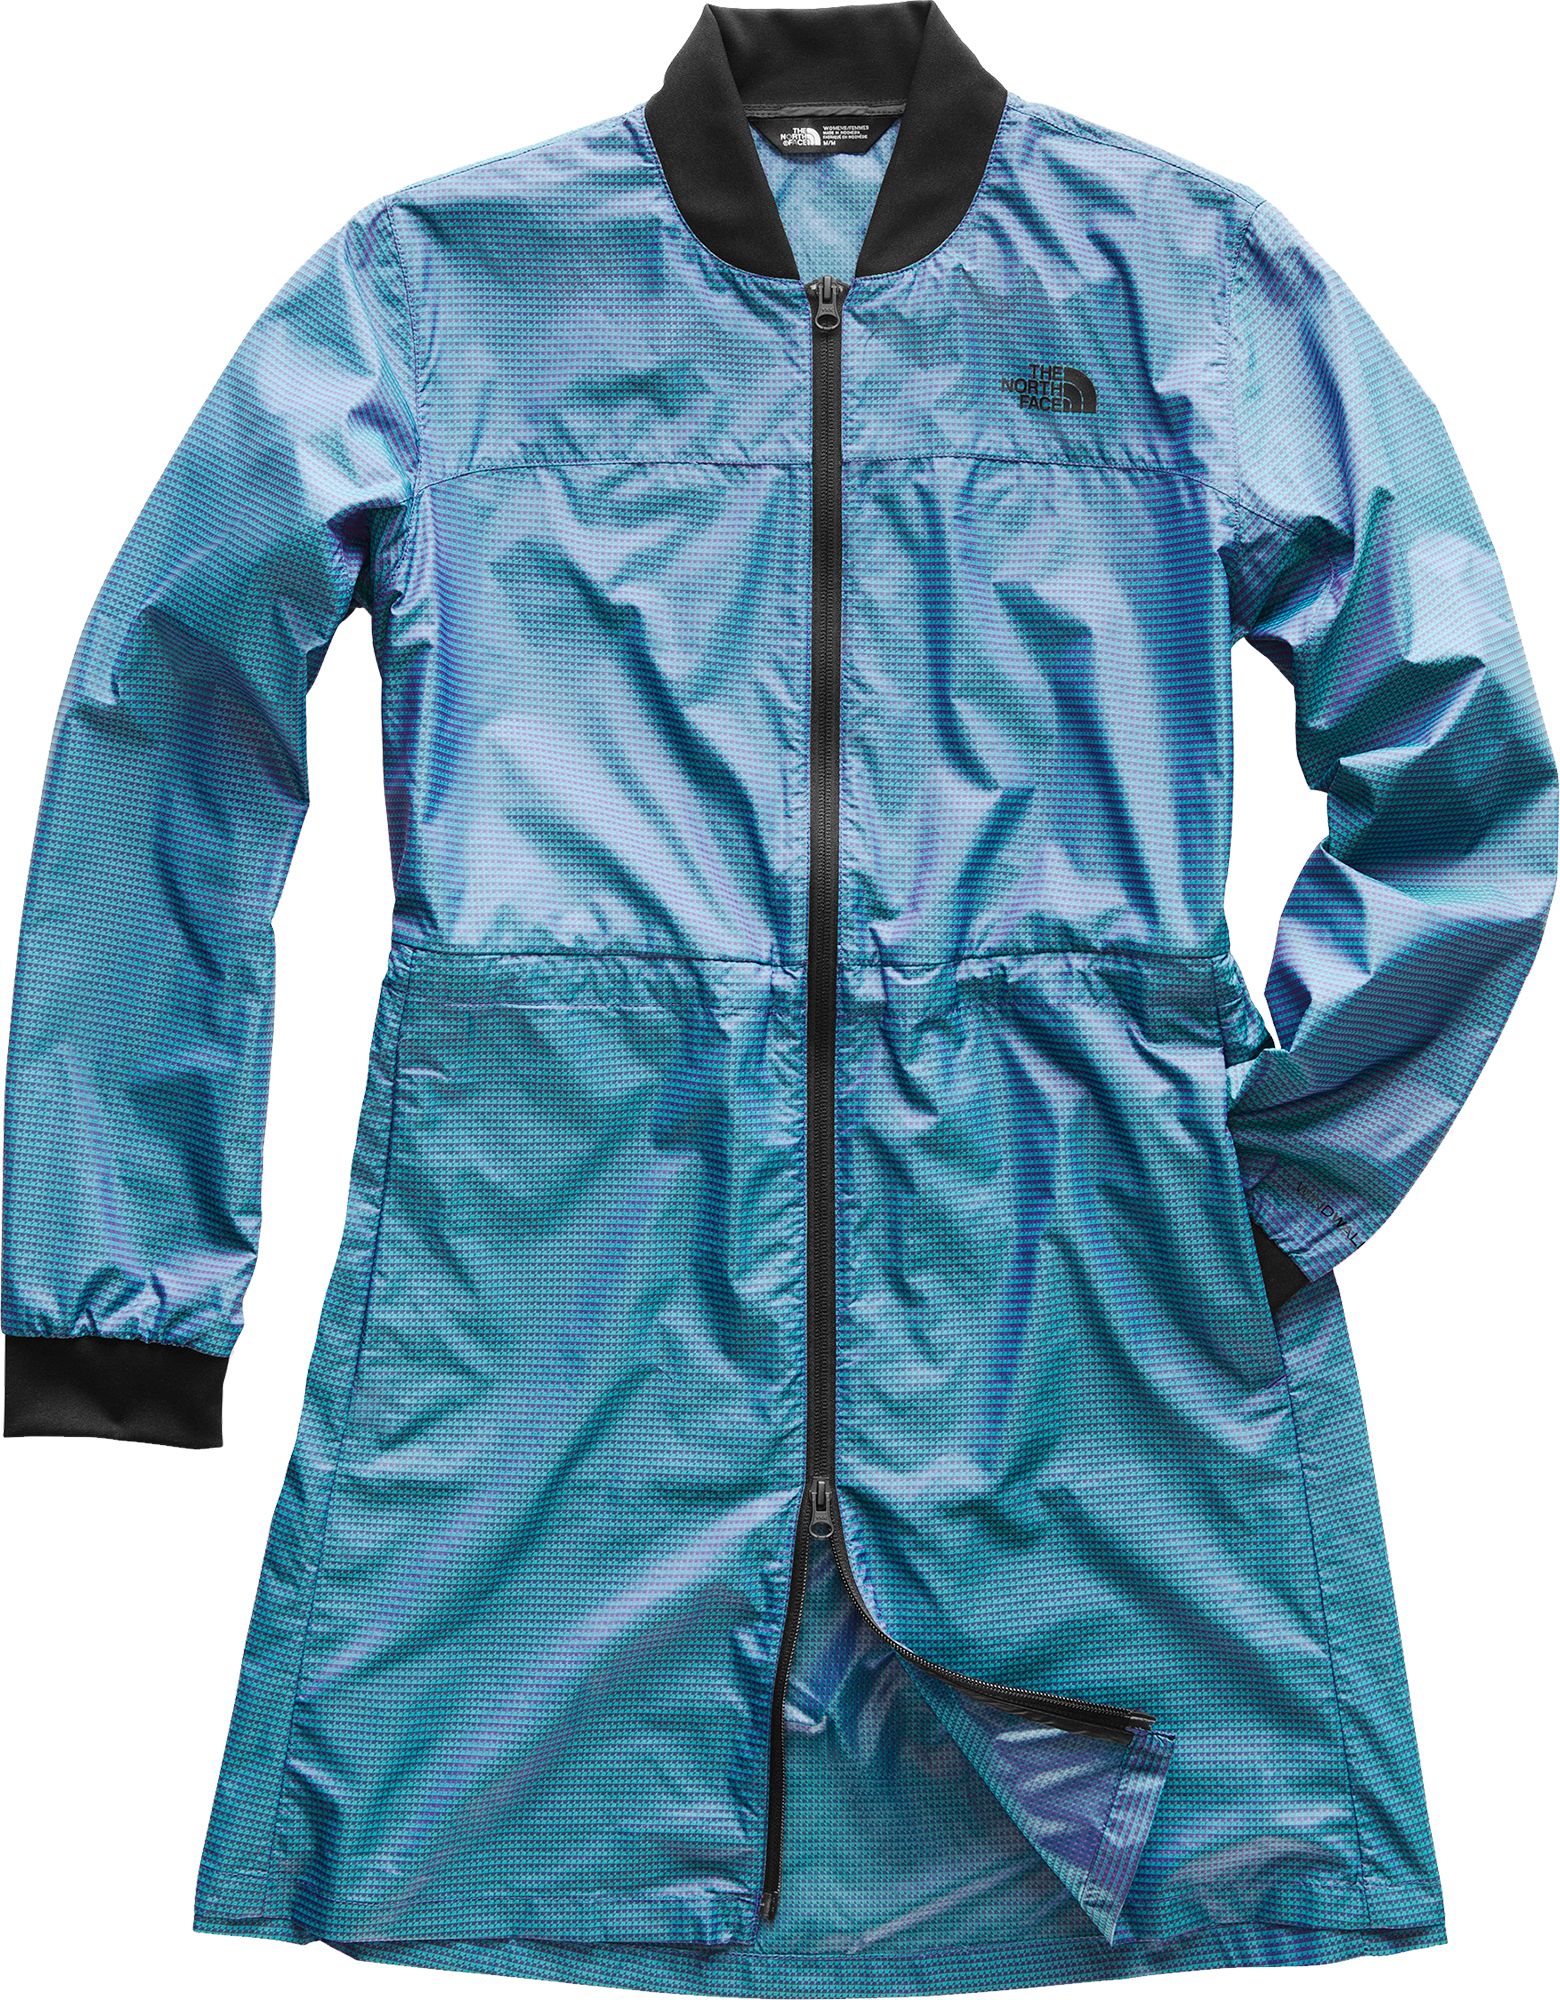 north face teal jacket